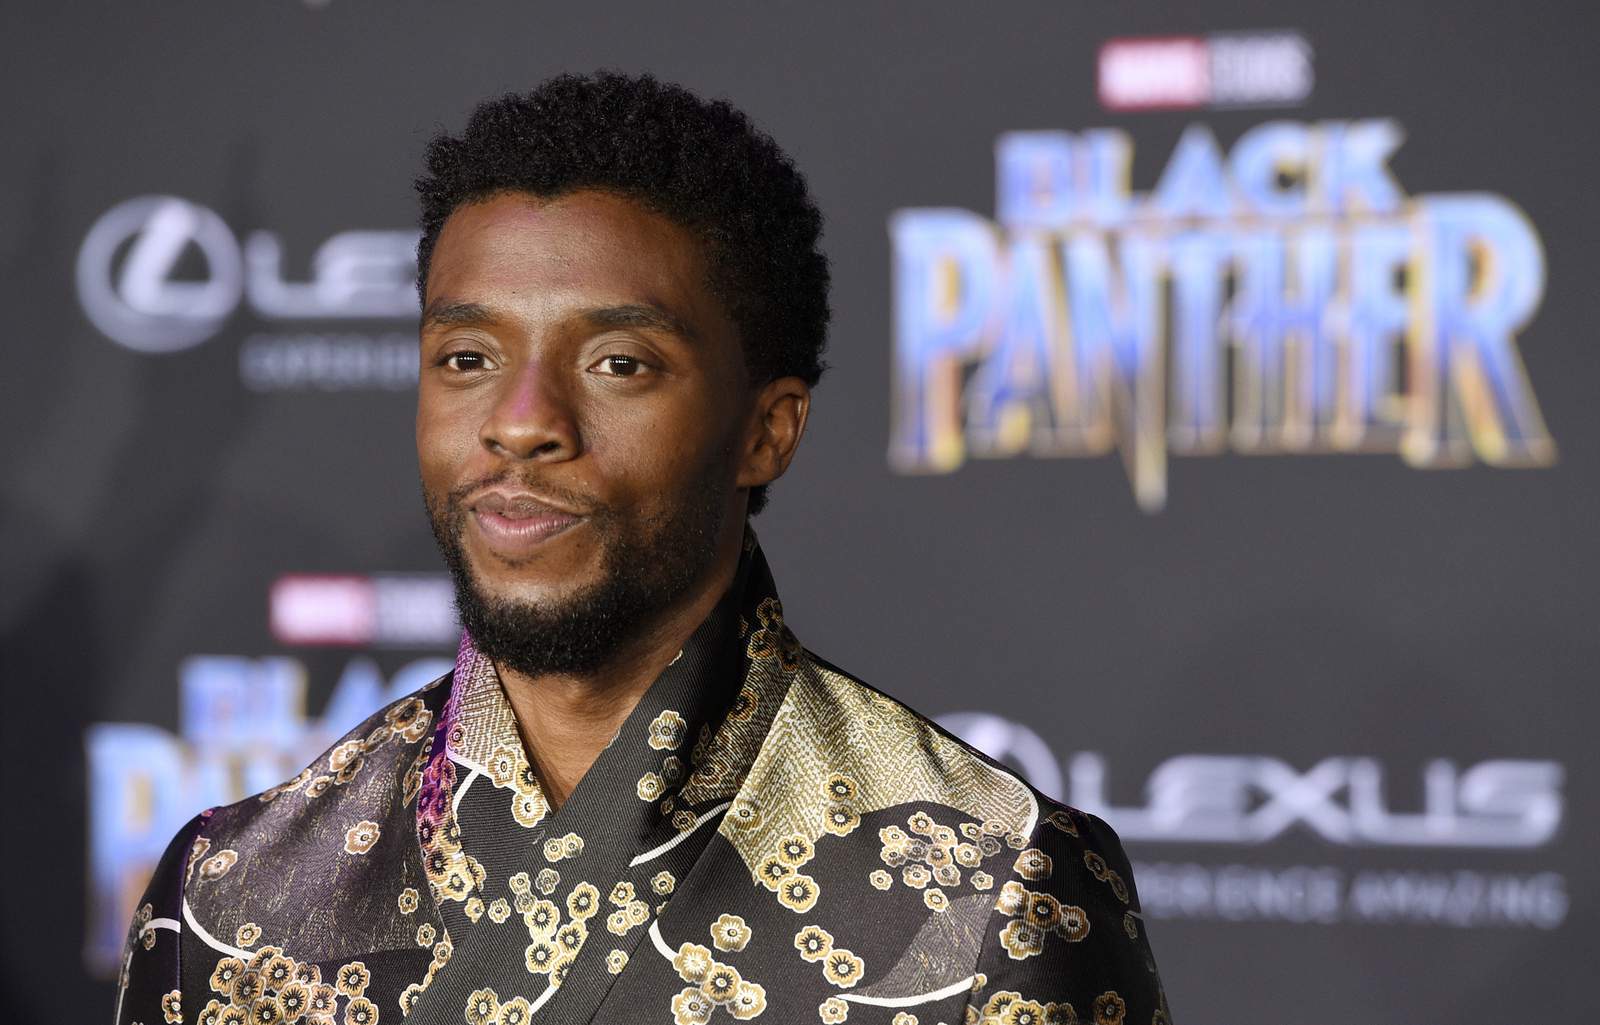 Disney Plus pays special tribute to Chadwick Boseman in ‘Black Panther’ movie intro